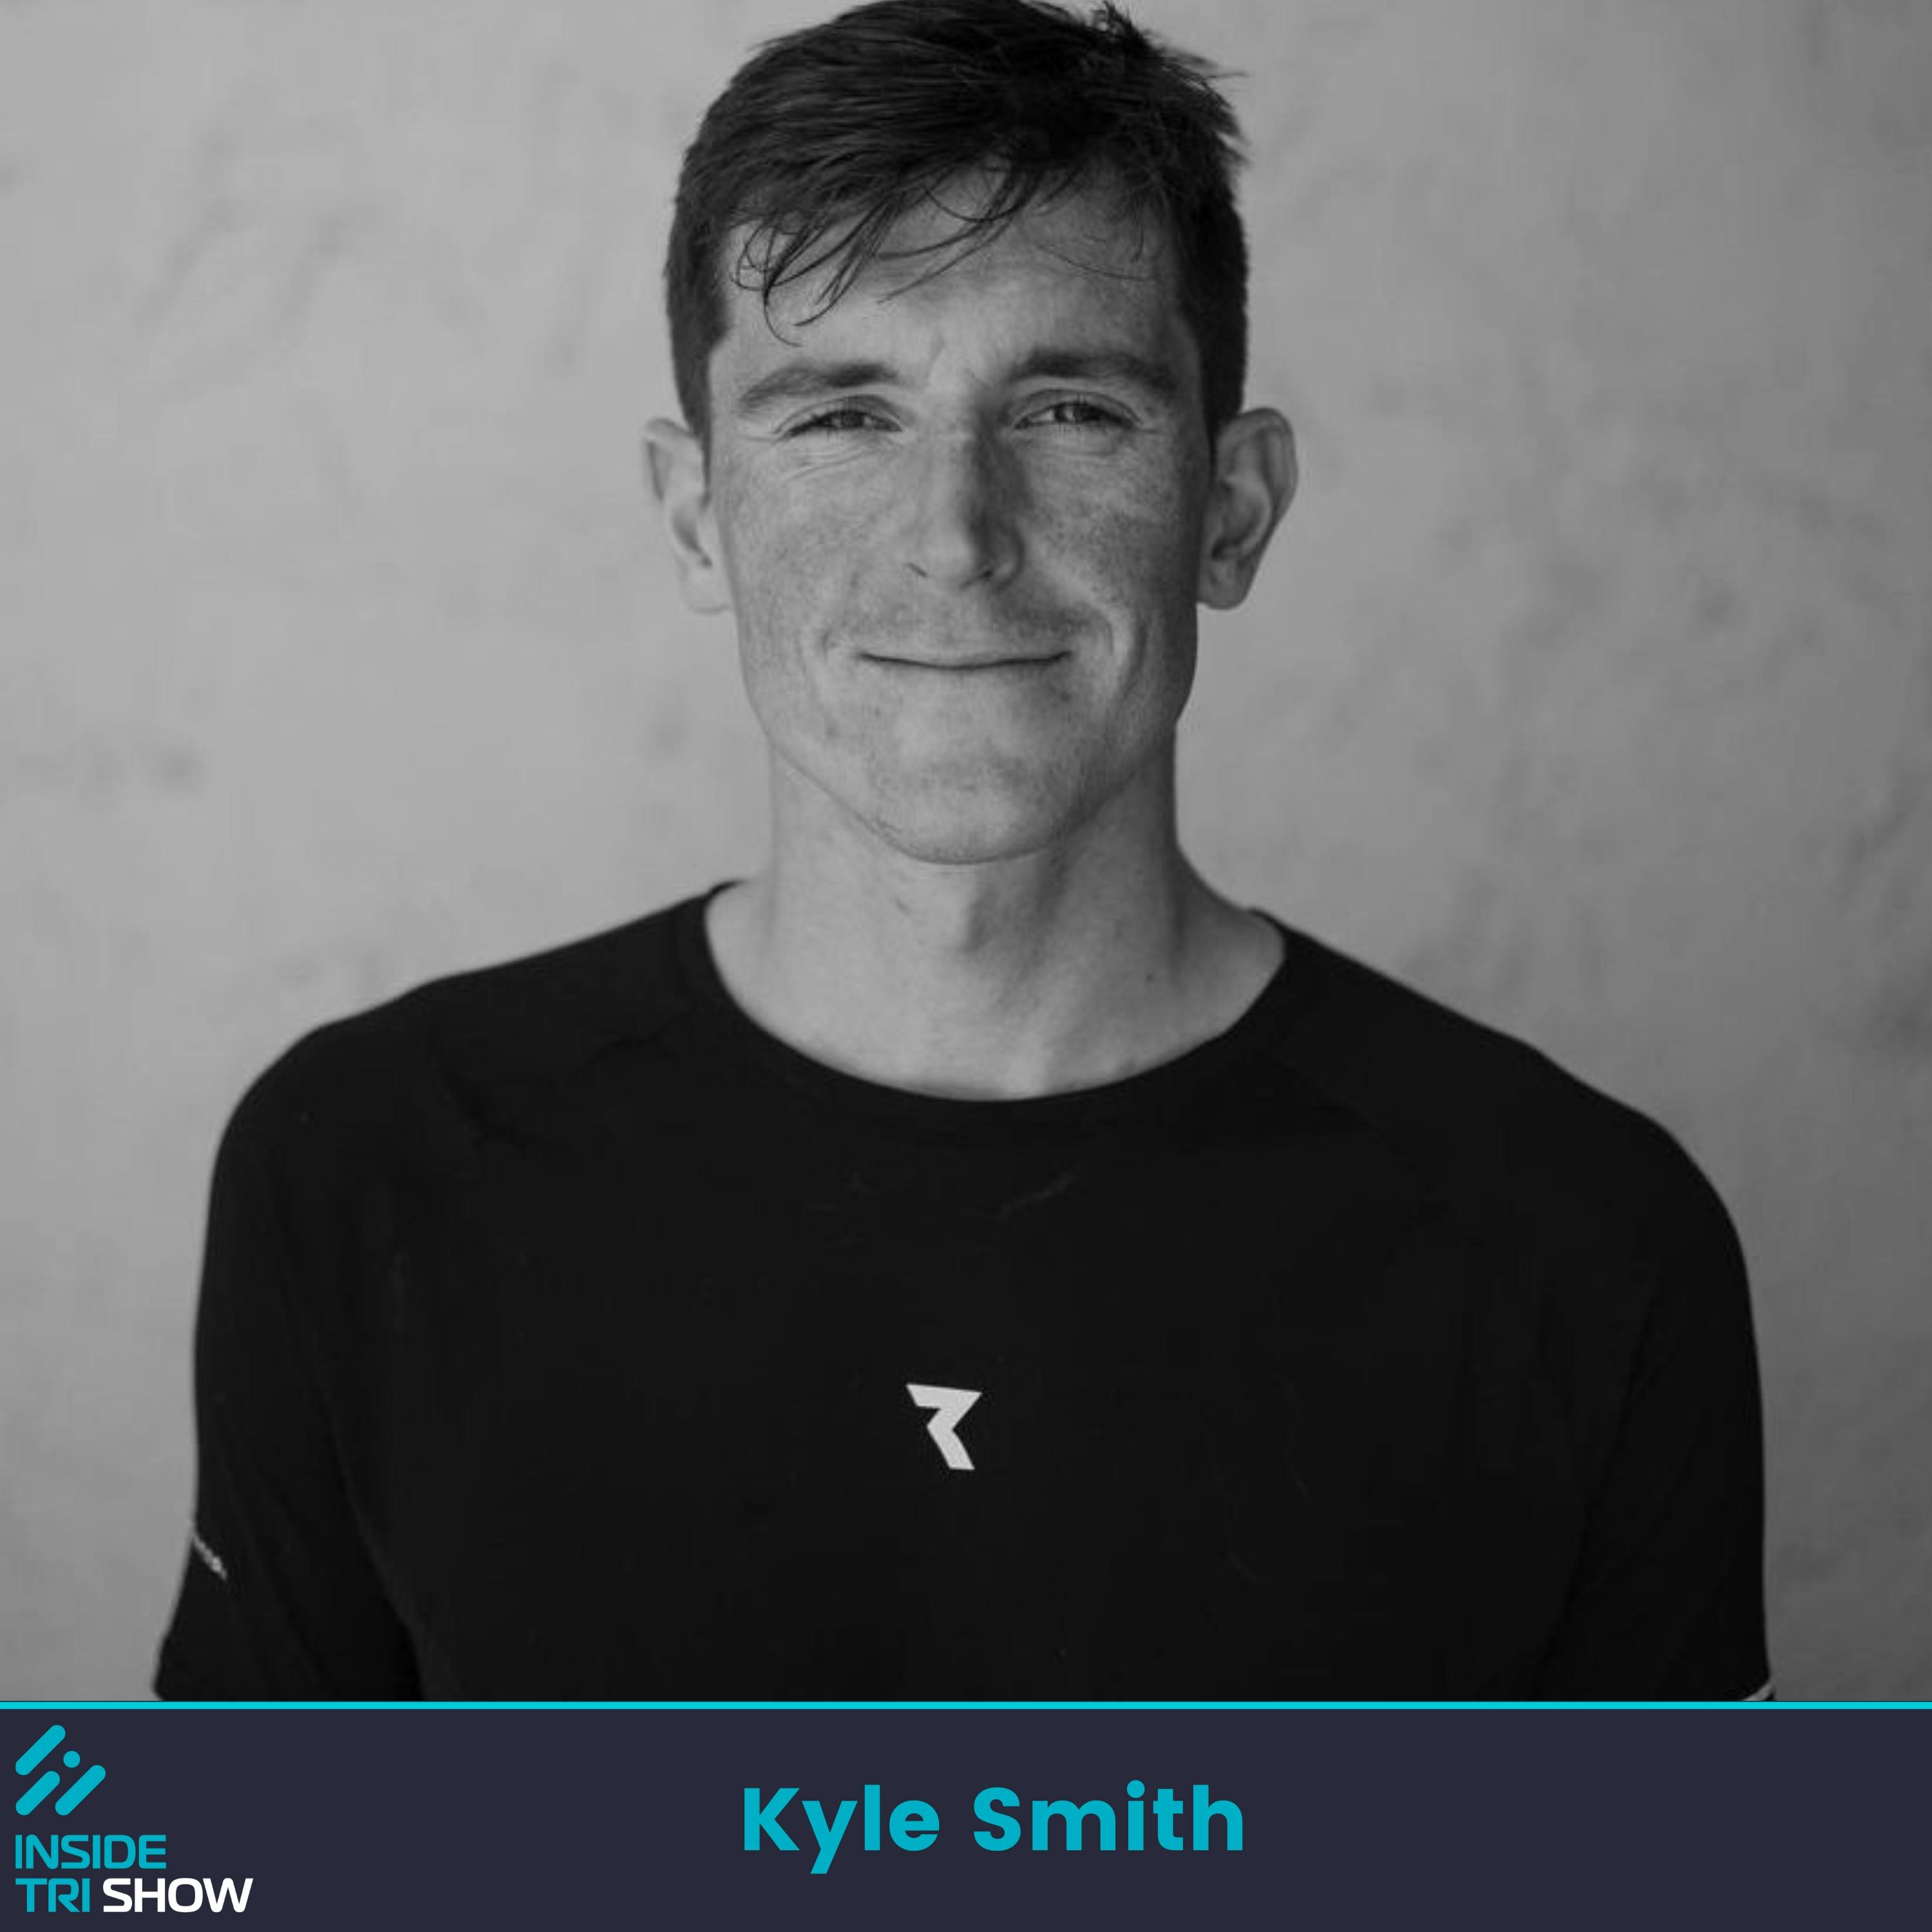 Kyle Smith: The epitome of hard work